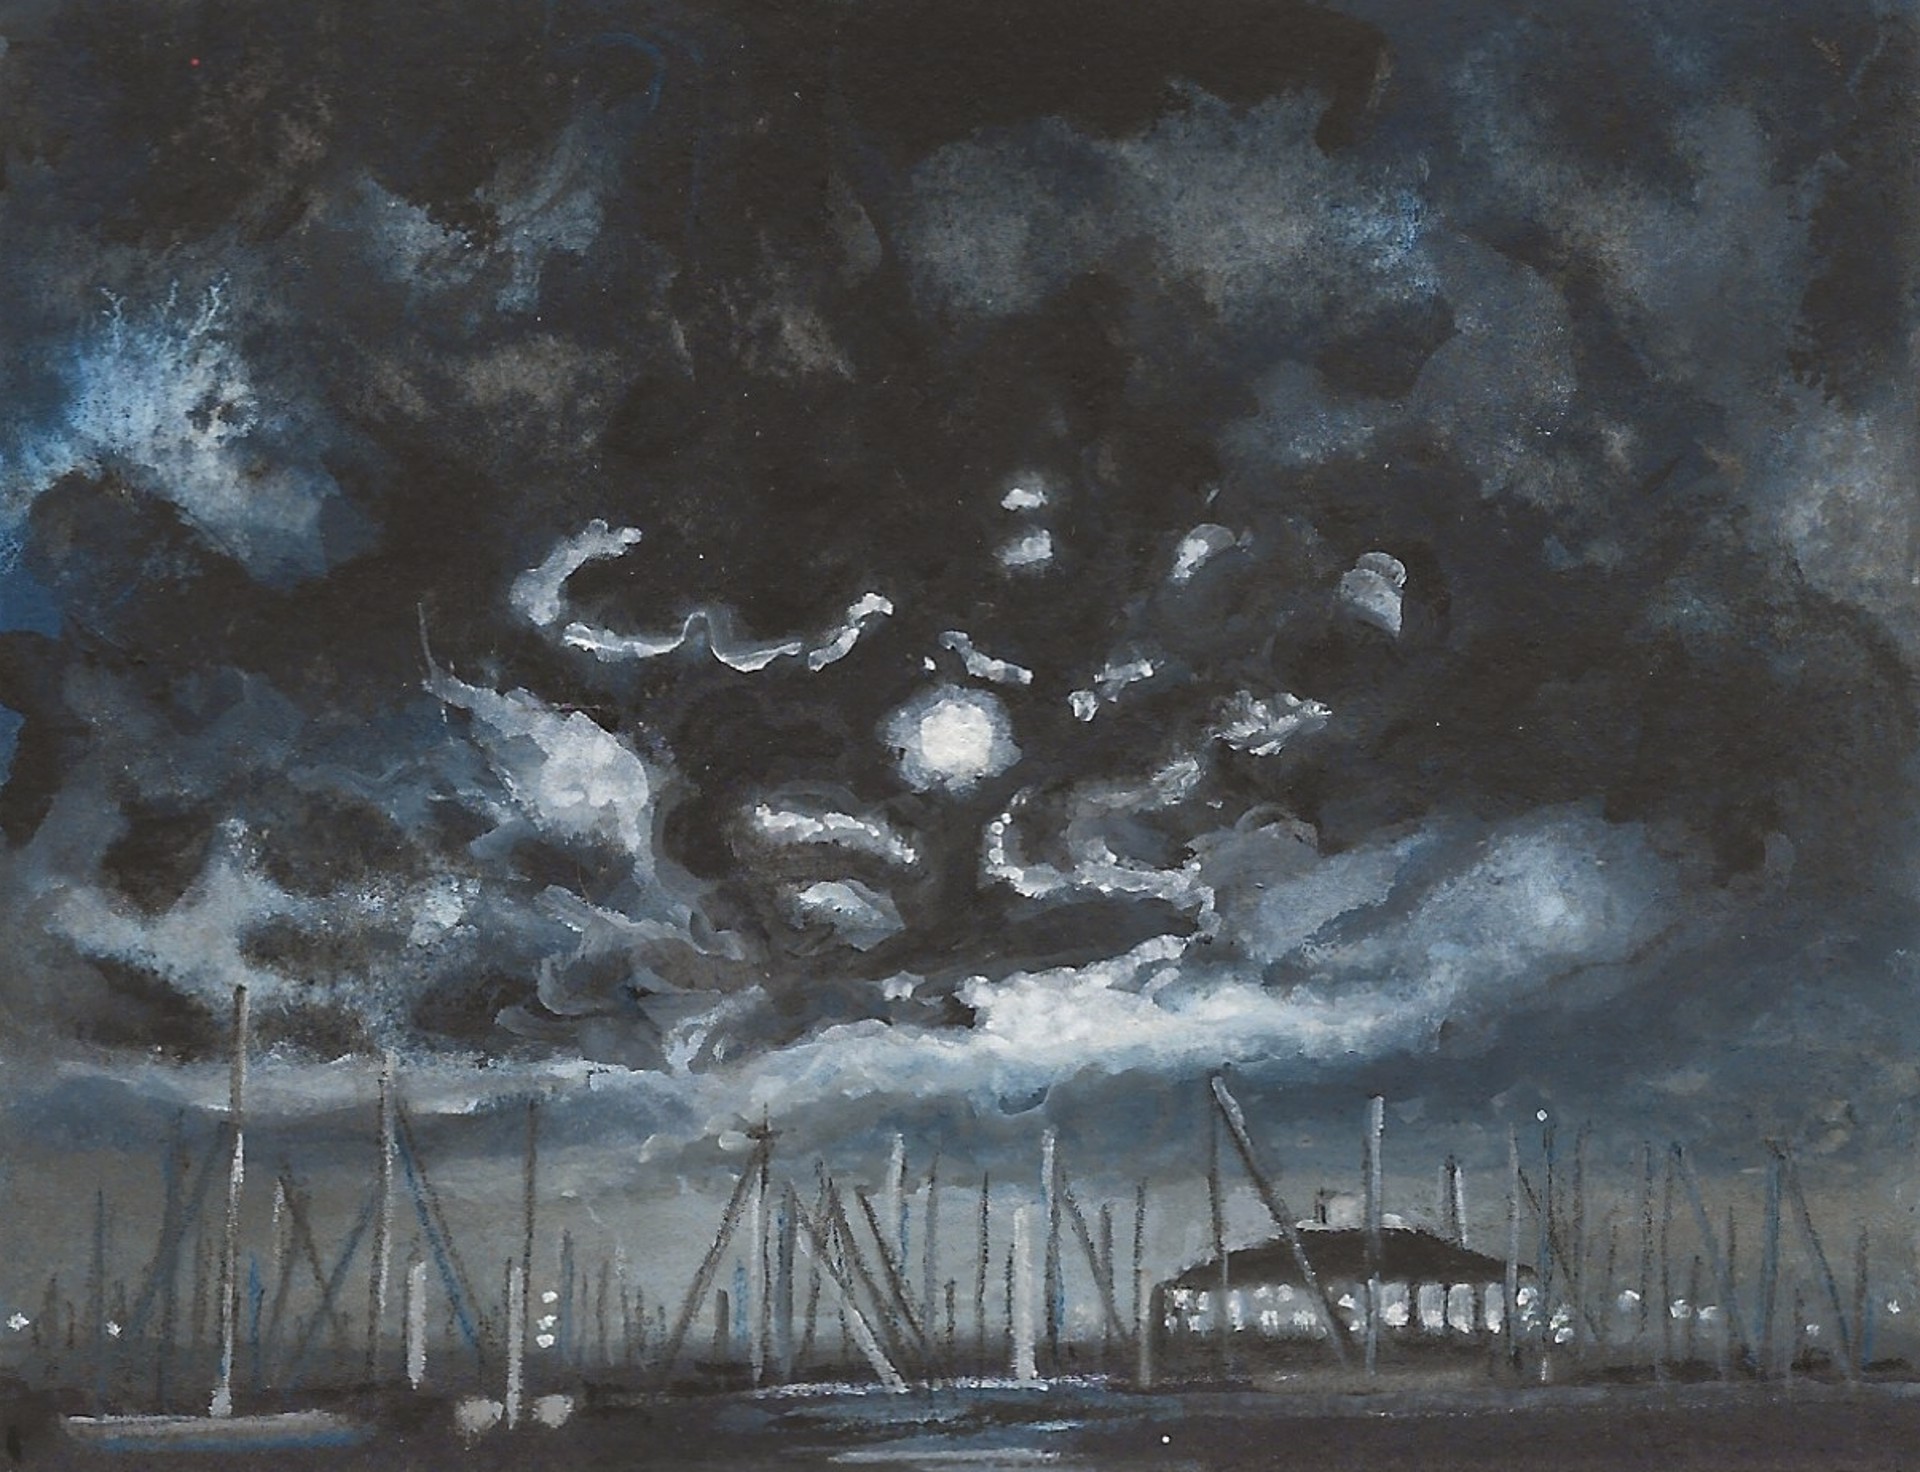 Moonlit Clouds and Masts by Kristin Malin